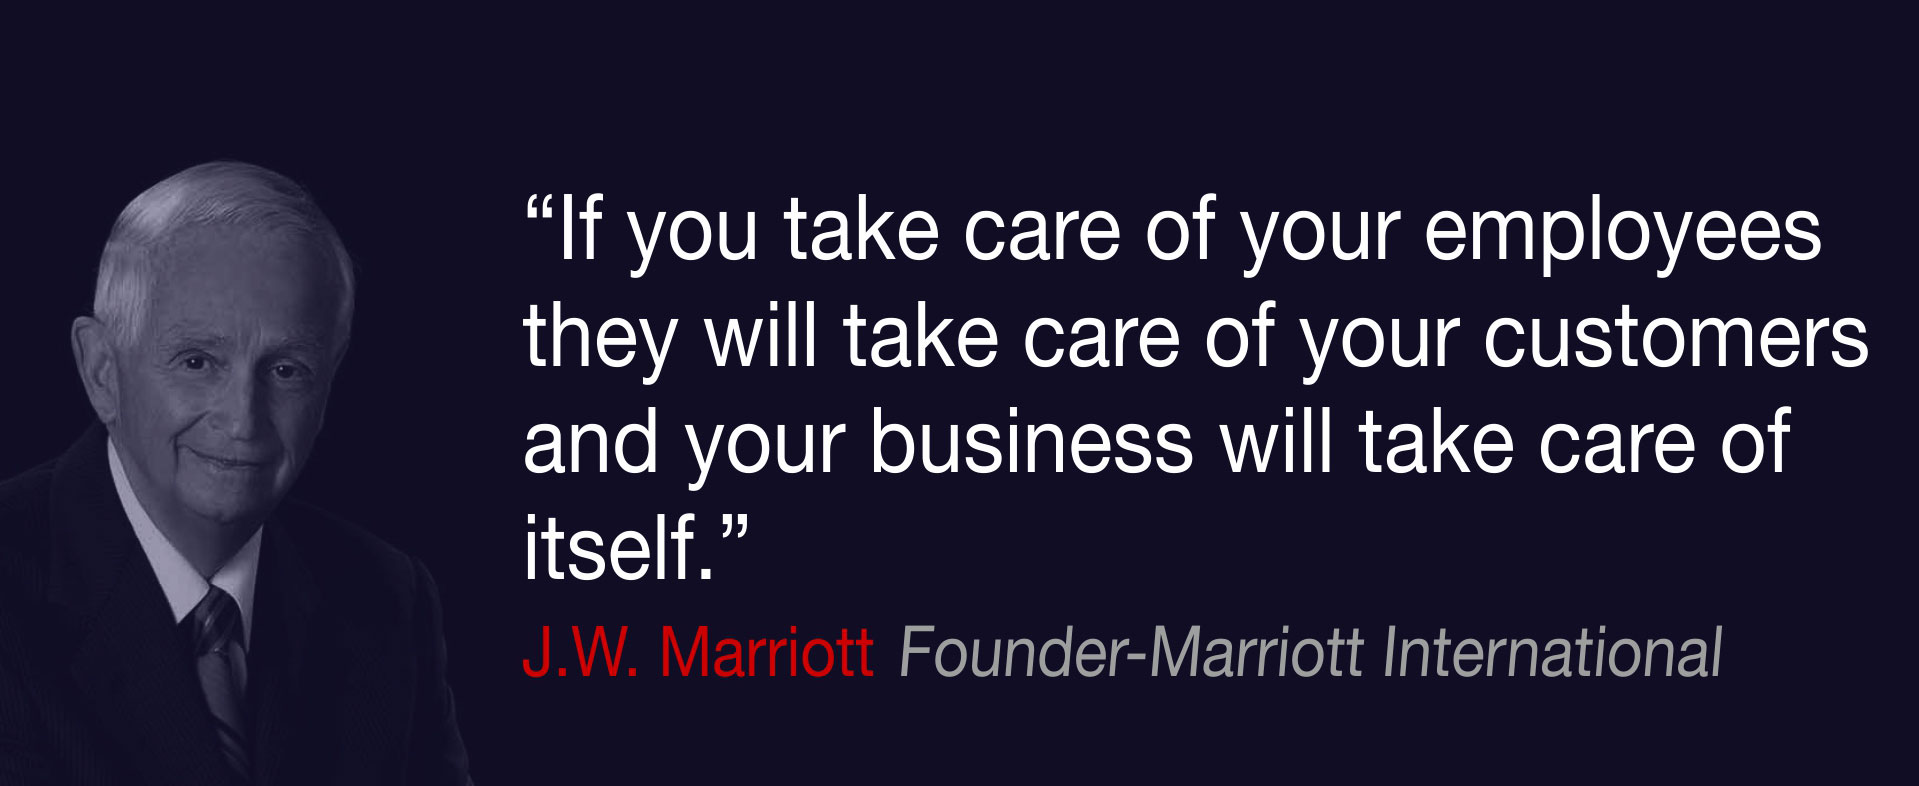 If you take care of your employees
they will take care of your customers and your business will take care of itself, J.W. Marriott